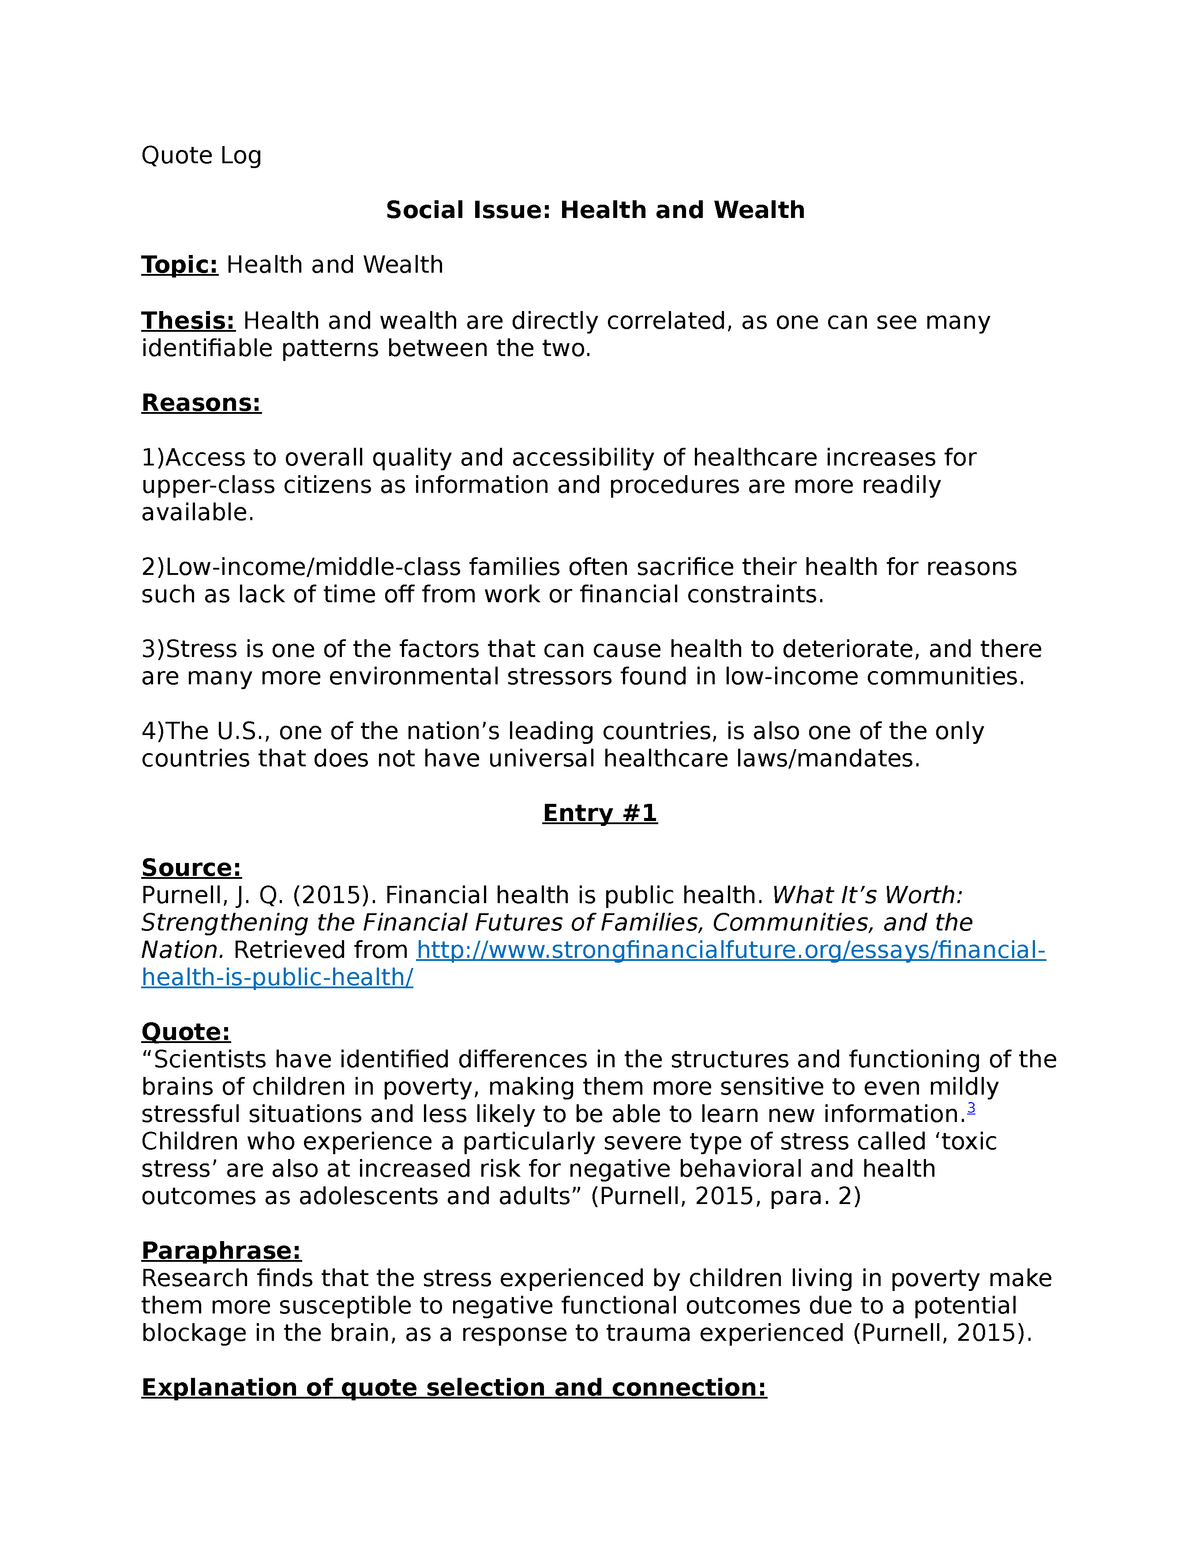 thesis statement on health and wealth